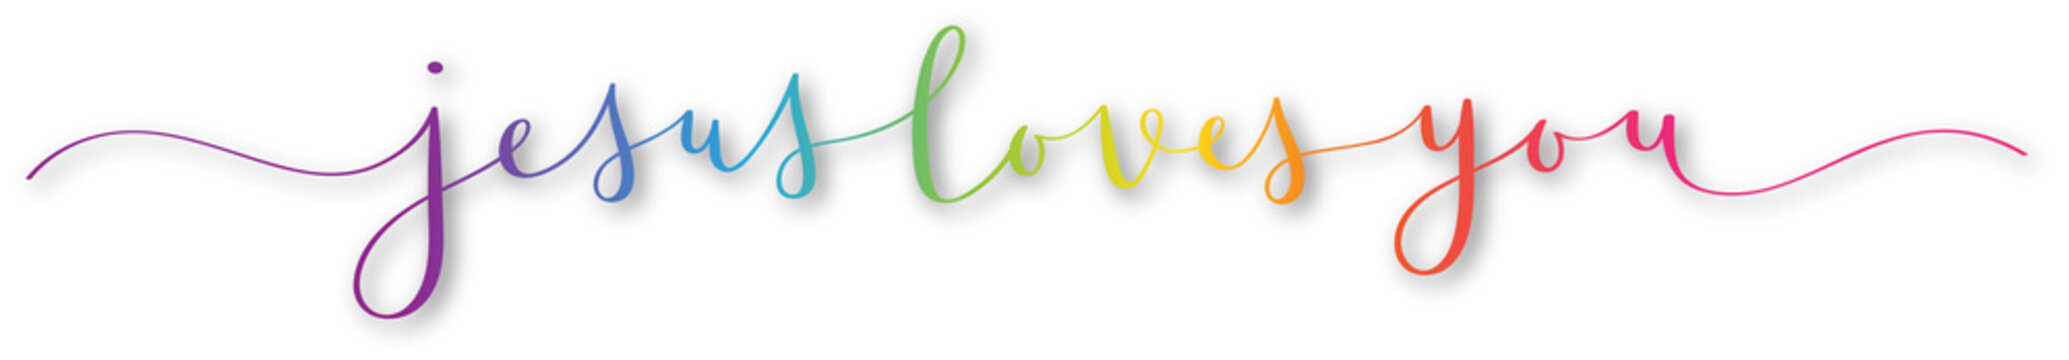 JESUS LOVES YOU rainbow-colored brush calligraphy banner on transparent background